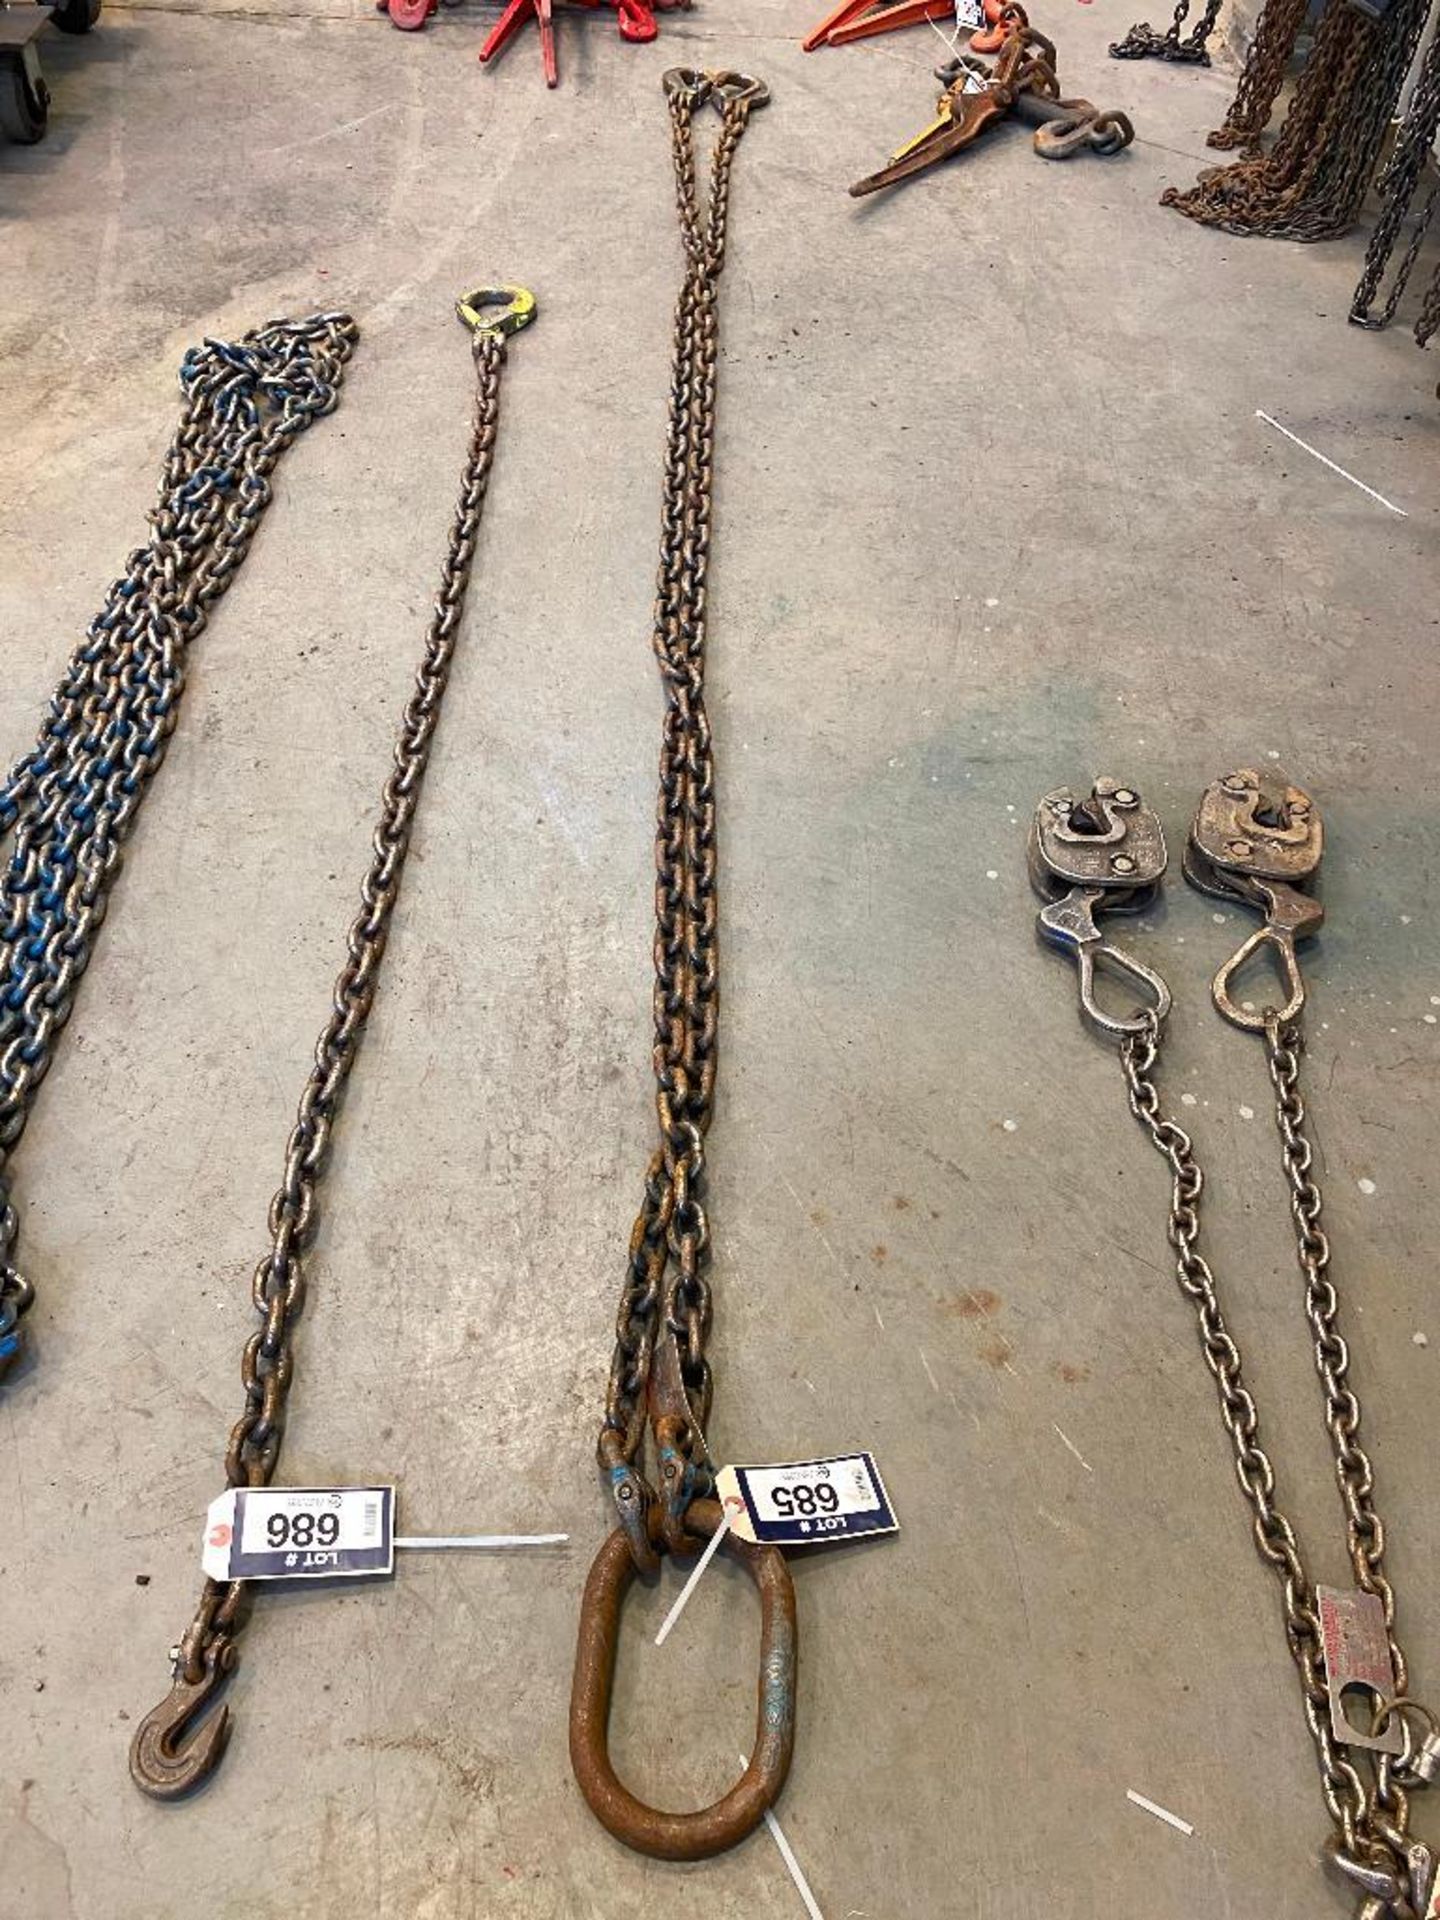 3/8" Chain Lifting Sling - Image 2 of 3